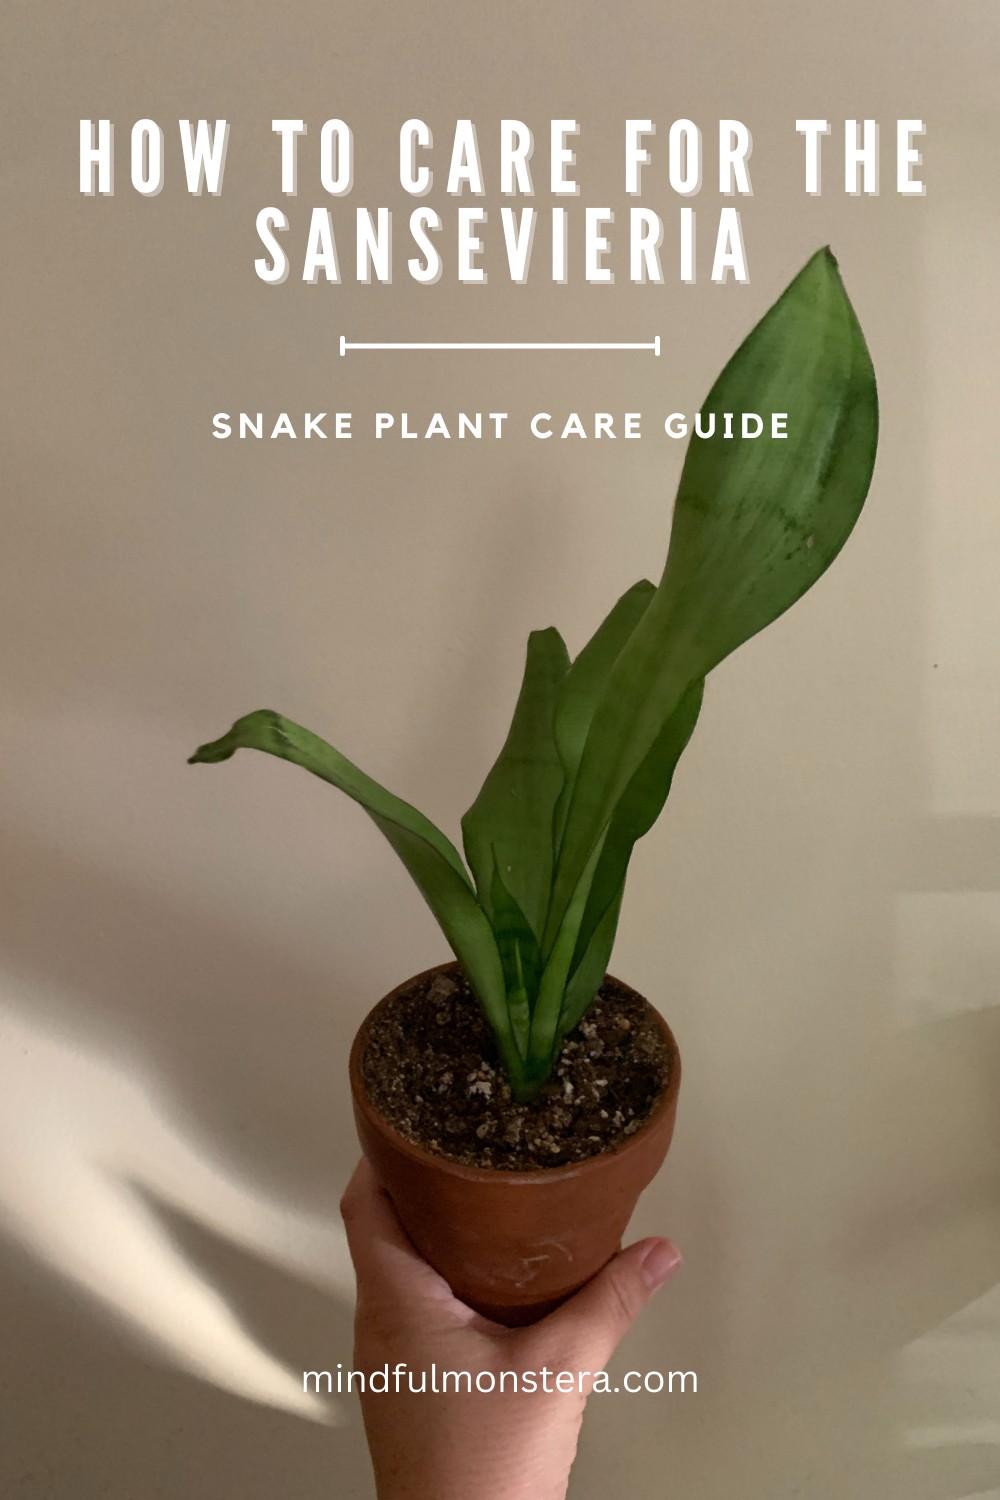 HOW TO CARE FOR THE
SANSEVIERIA